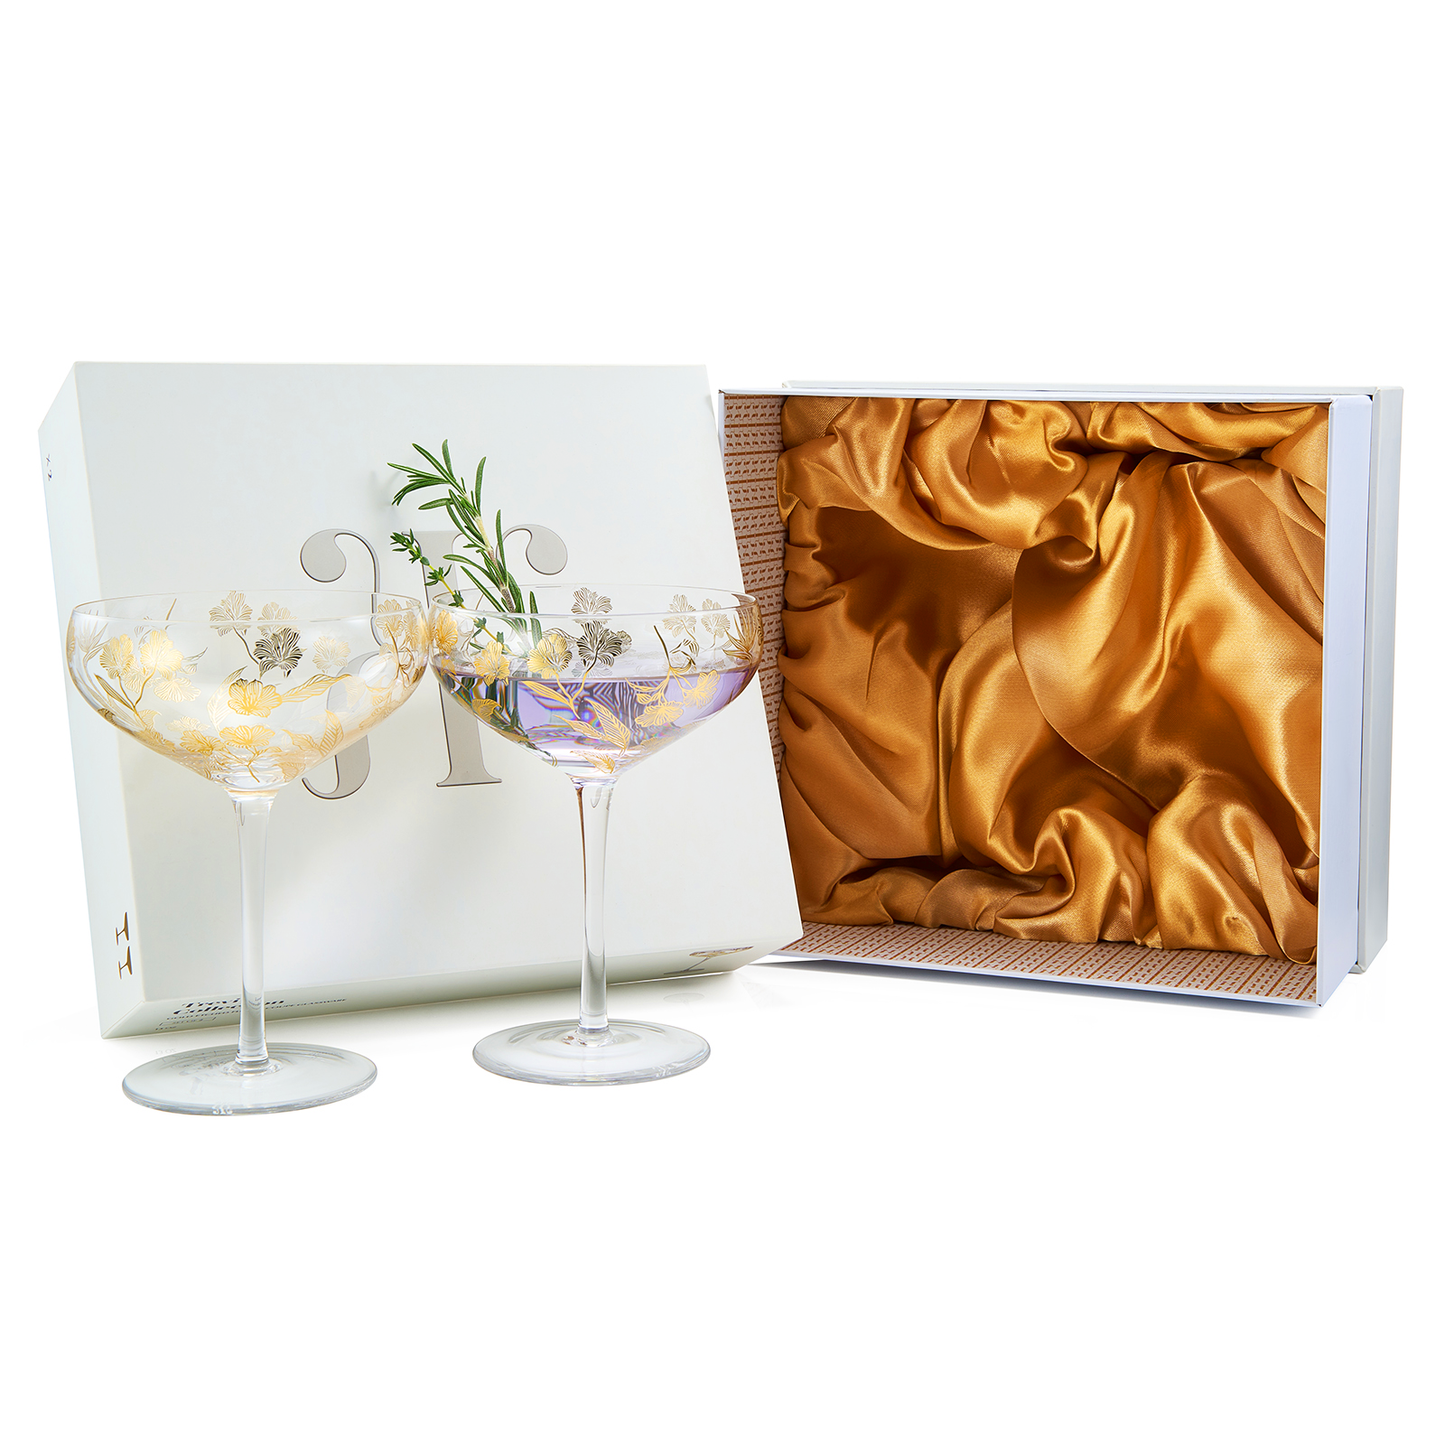 Trevi Coupe Cocktail Glassware, Set of 2